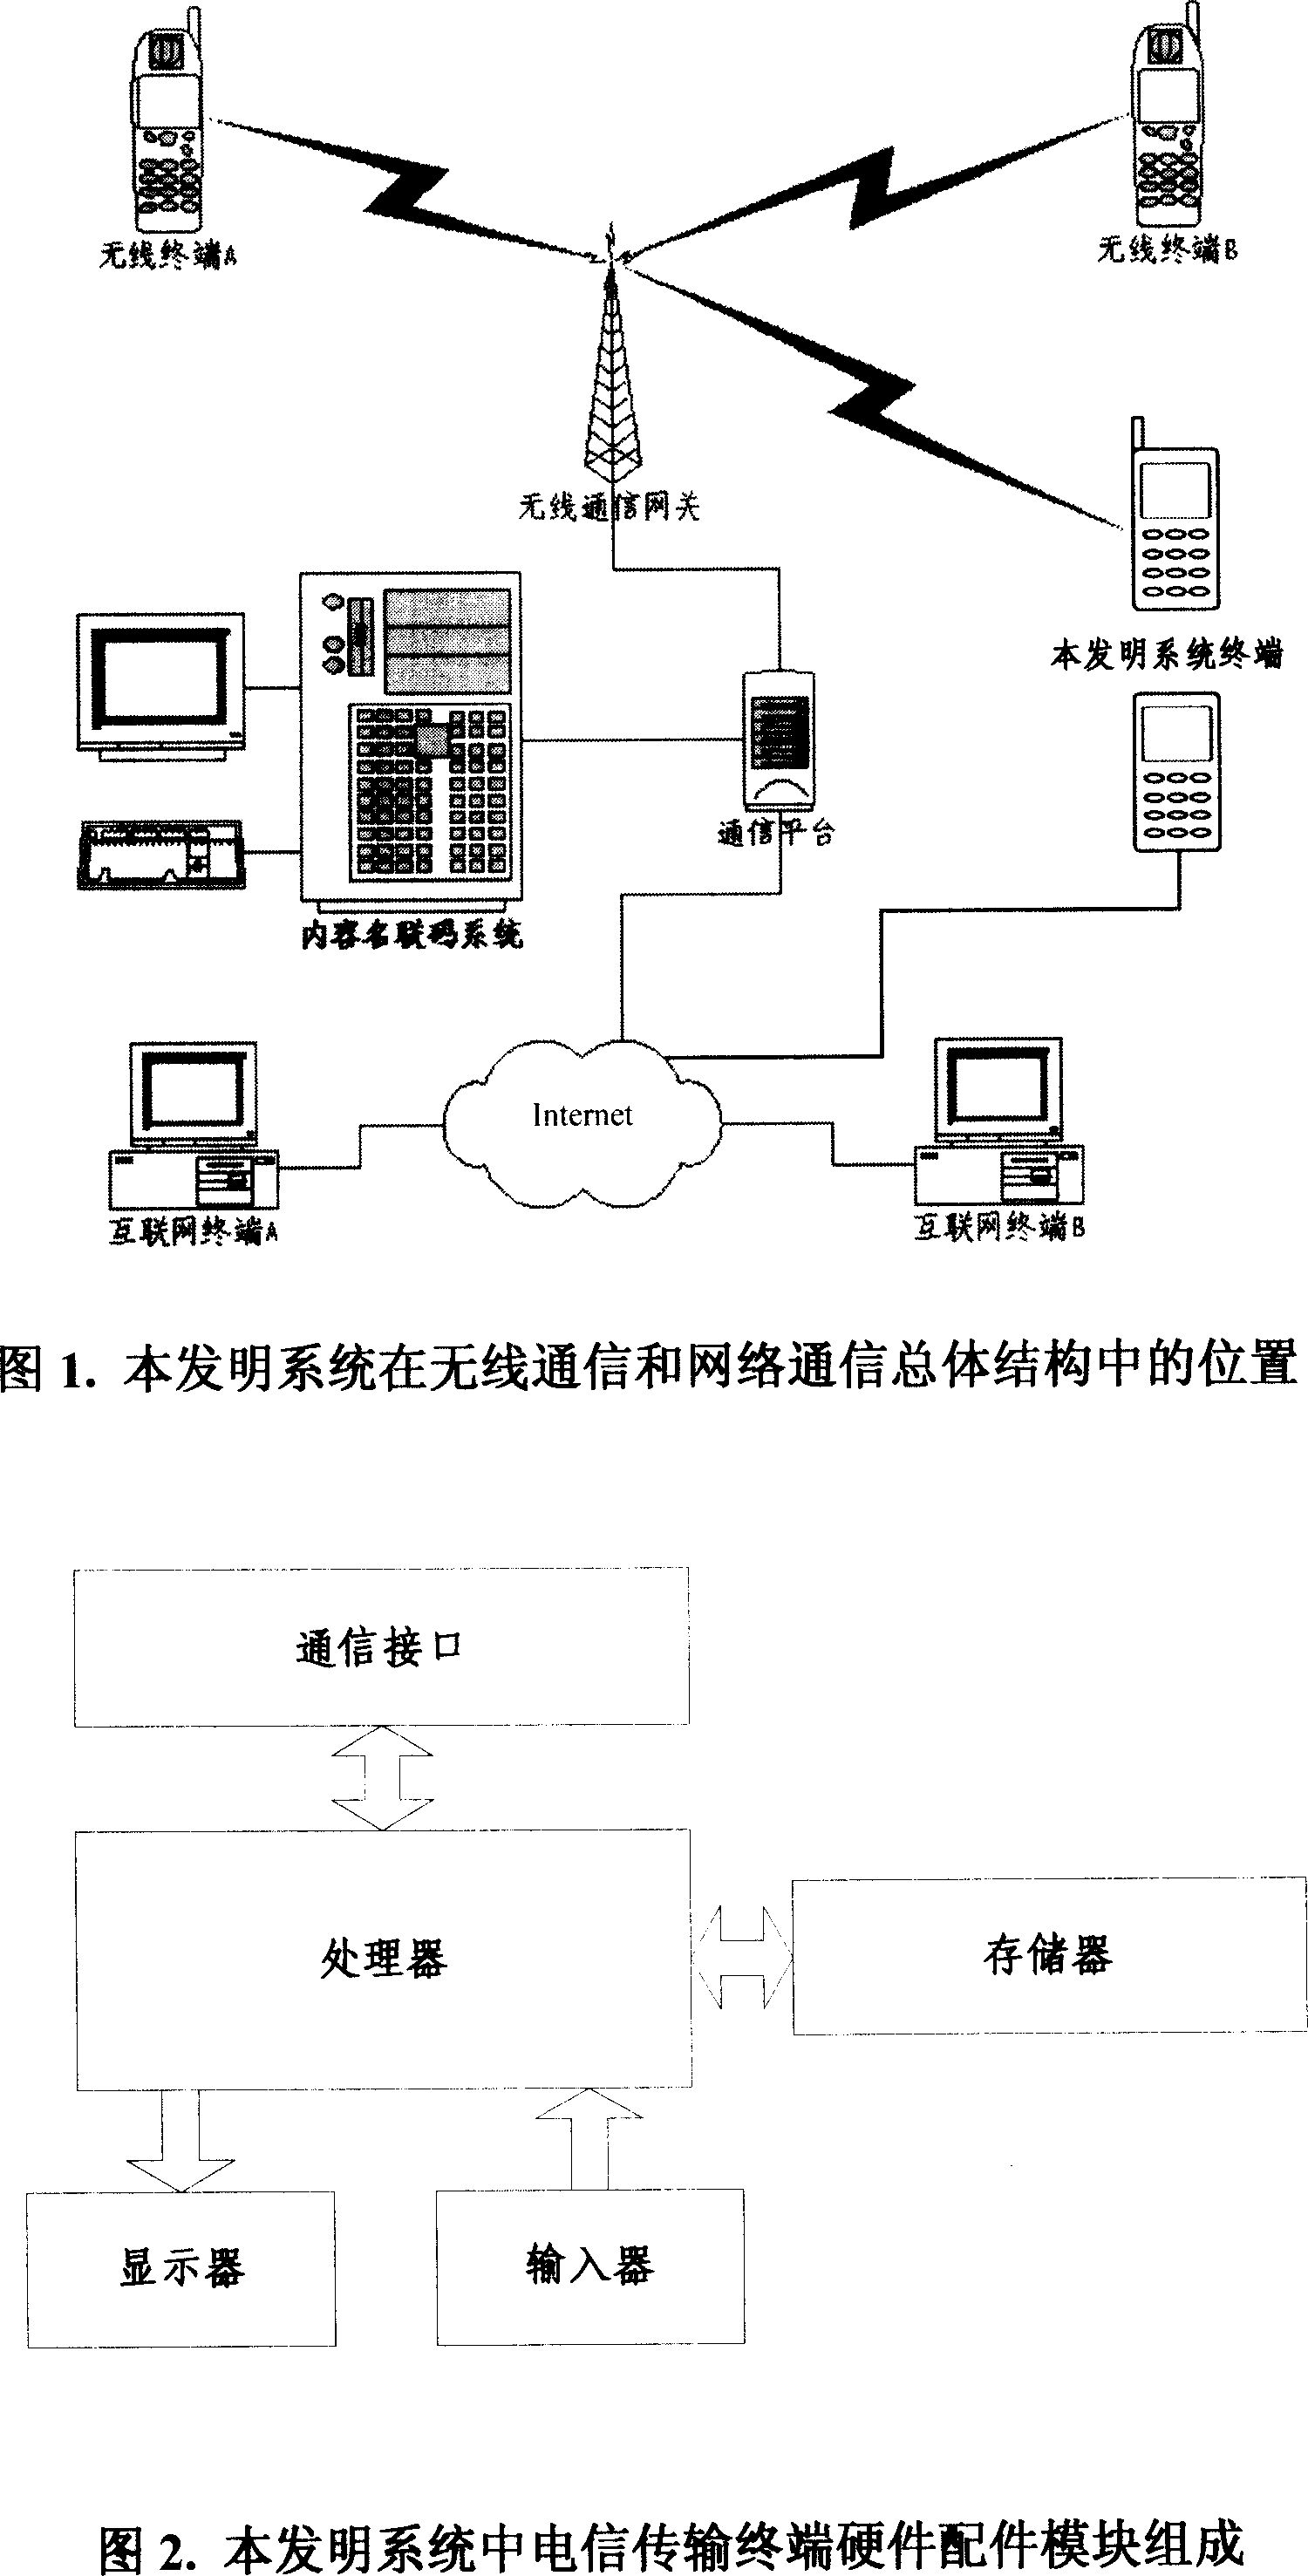 Method and system for directed transmitting content and distributed accessing in telecommunication transmitting terminal